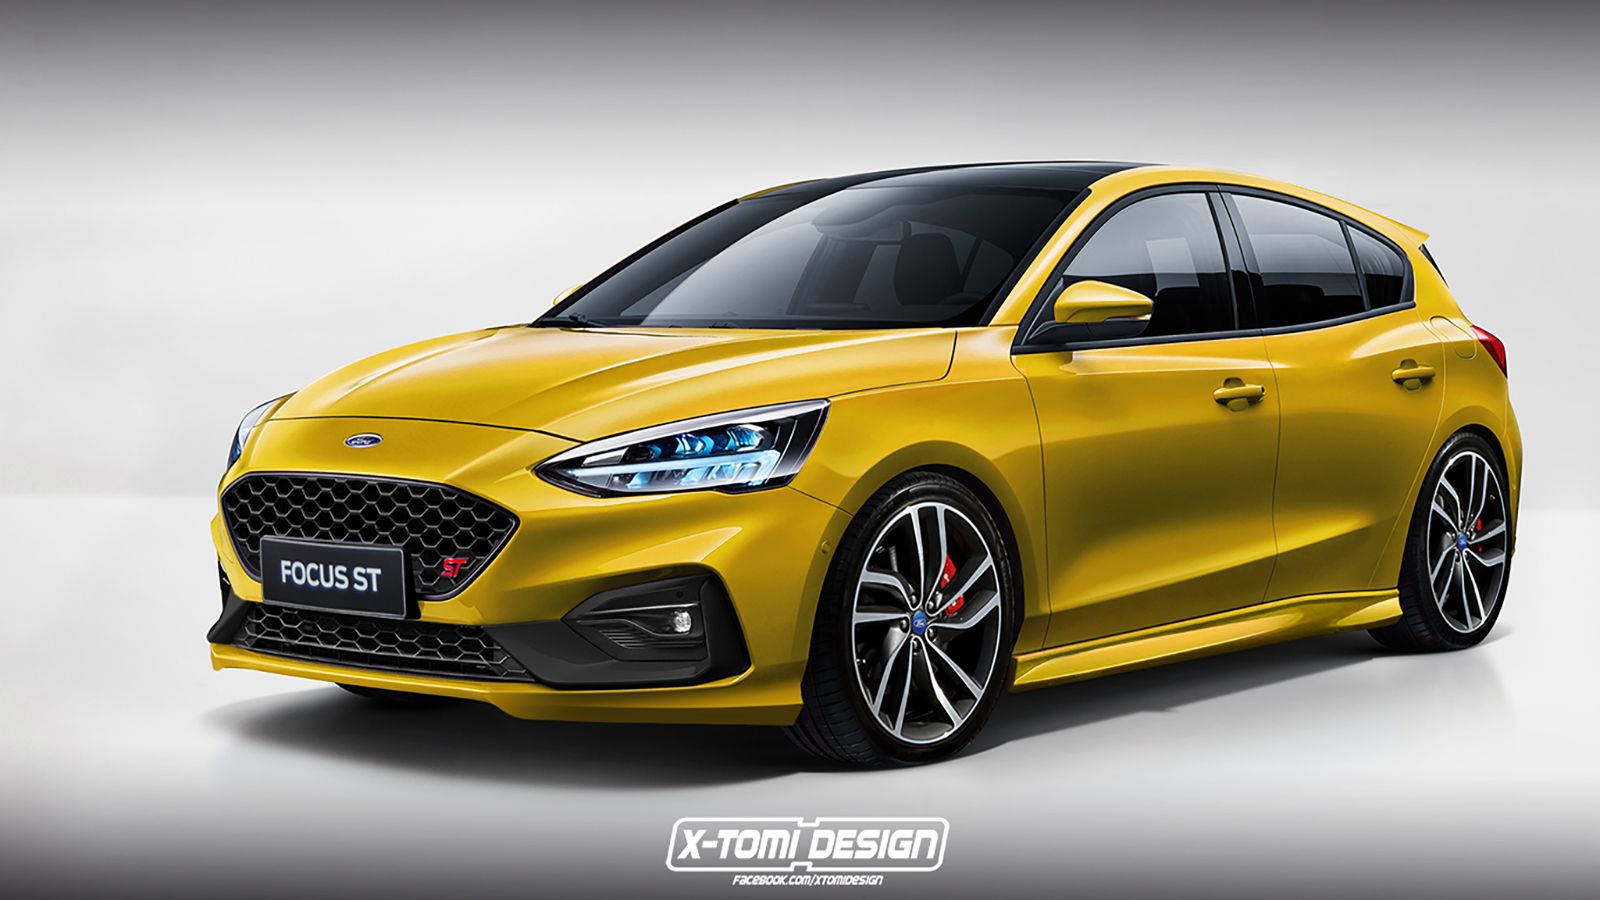 2019 The Next-Gen Ford Focus ST Will Take on the Renault Megane RS with the 2.3-Liter EcoBoost; Could Deliver as Much as 320 Horsepower